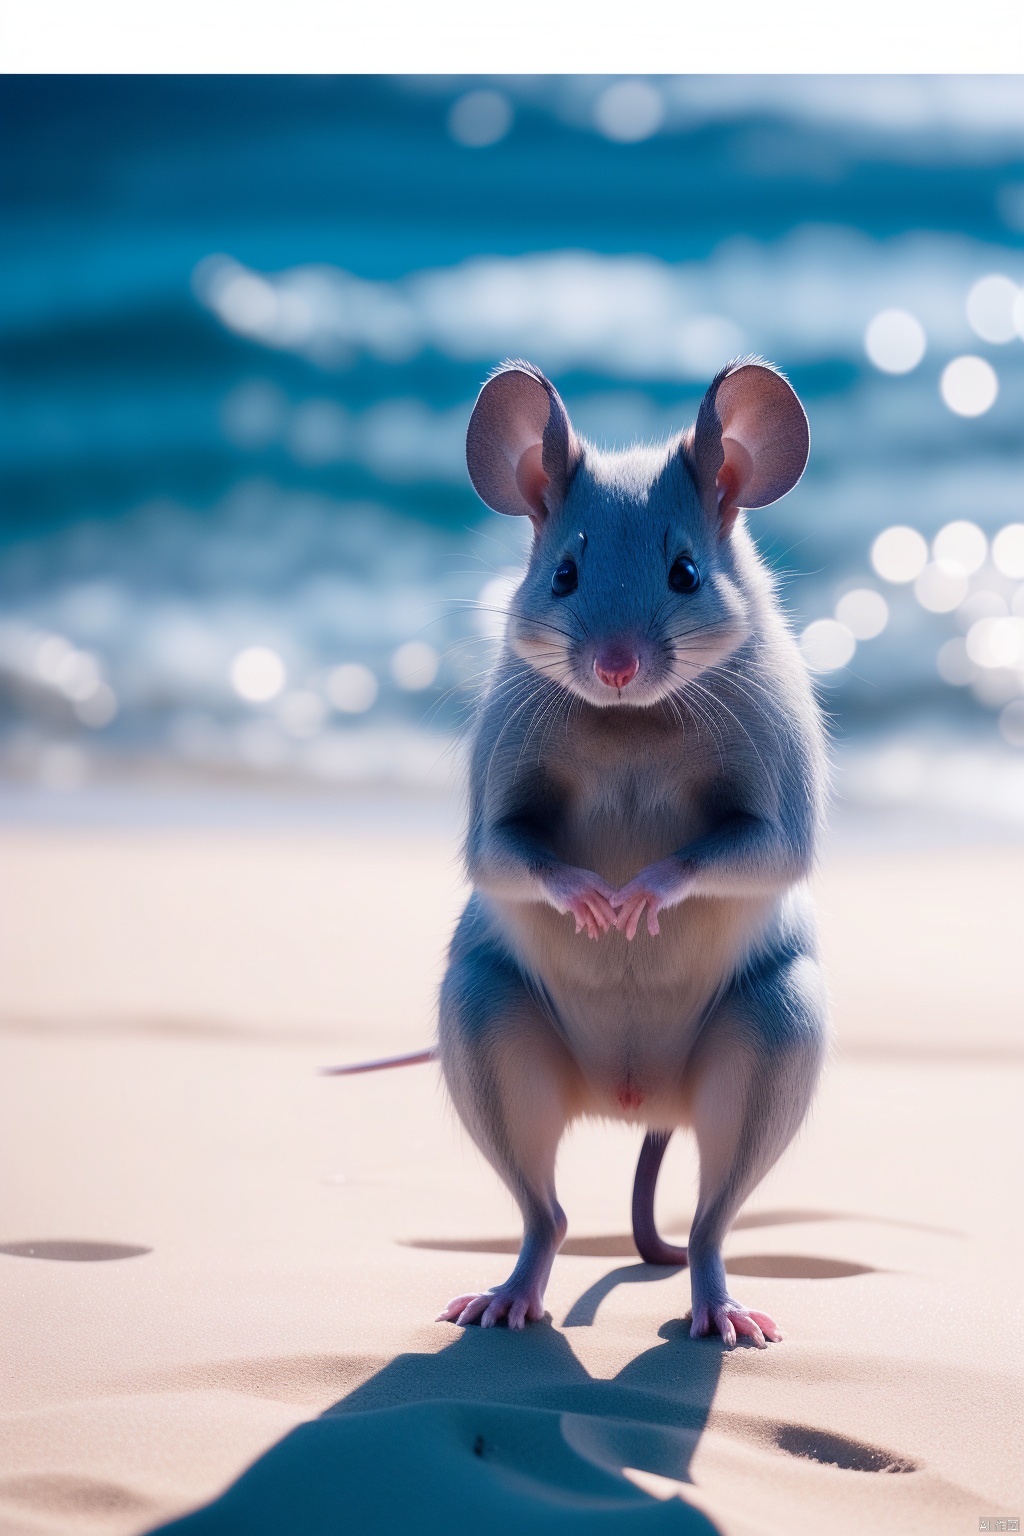  (masterpiece:1.4), professional photograhy, a small gray mouse,
BRAKE
conquistador
BRAKE
stands on the beach in the new world
BRAKE
full body, (cinematic light:1.3), shot on Lumix GH5
(cinematic bokeh, dynamic range, vibrant colors)